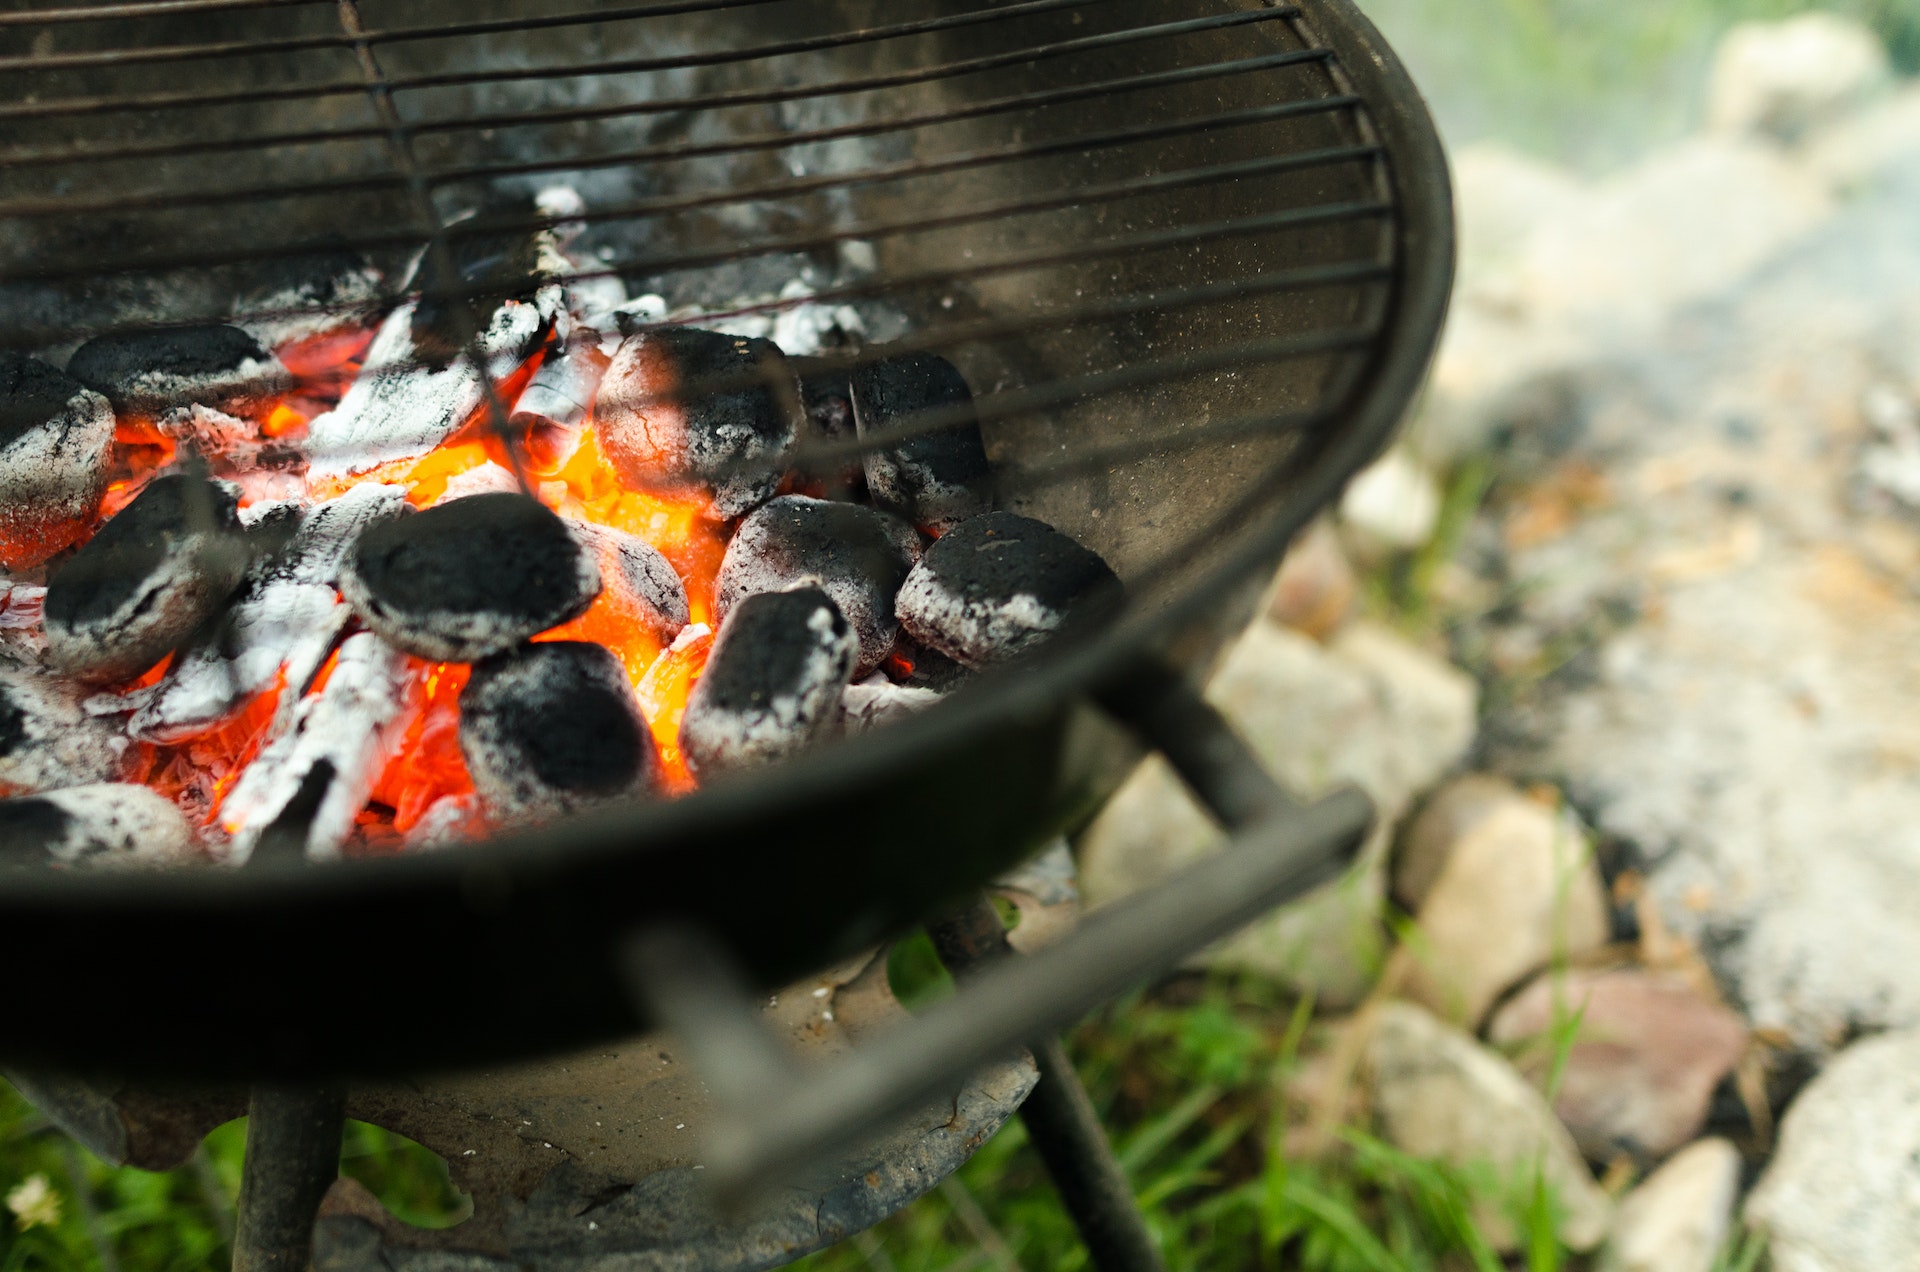 Charcoal grill with red hot coals